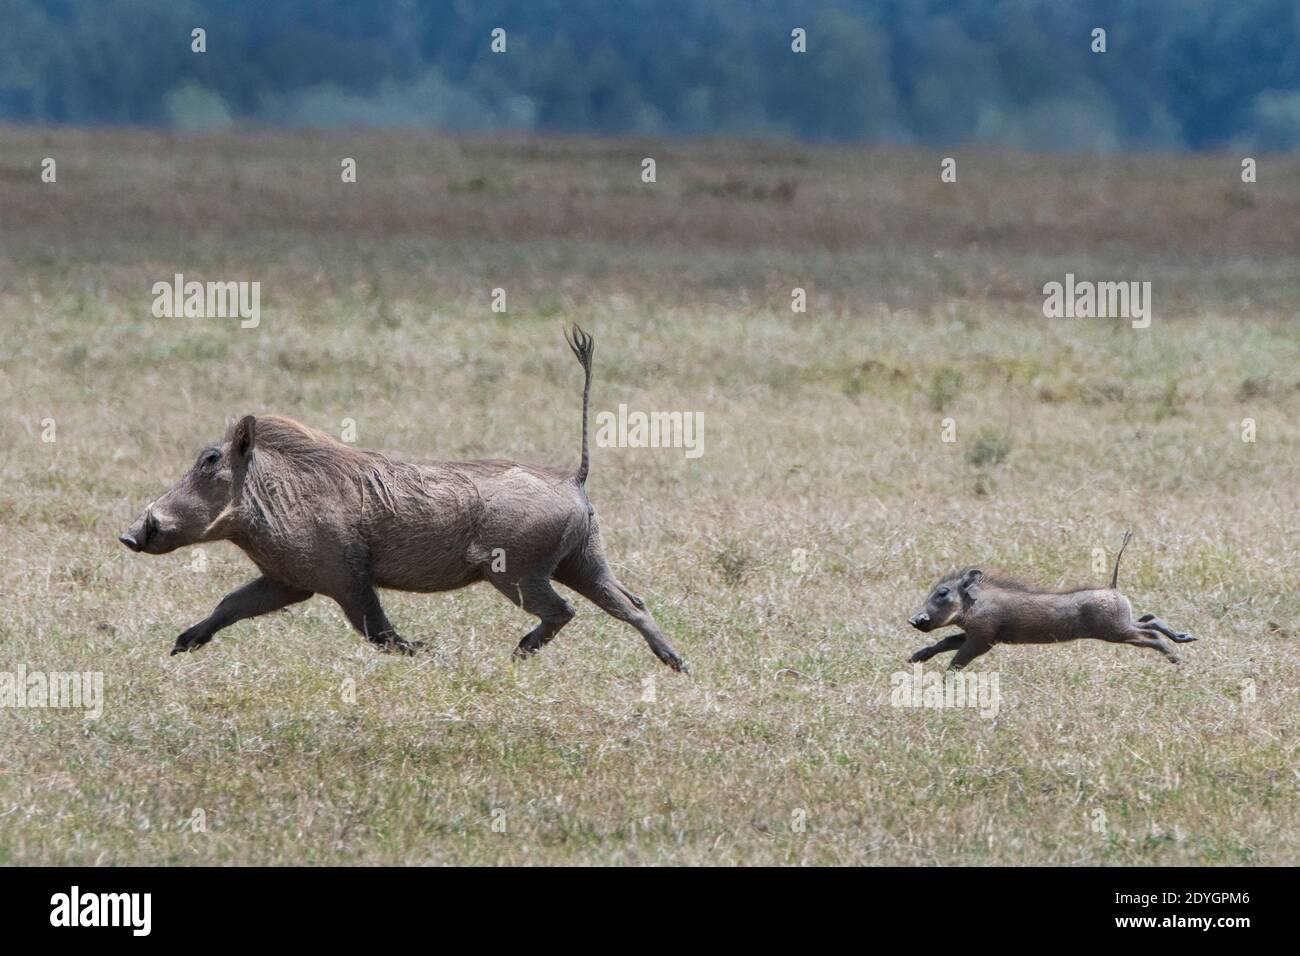 Africa, Kenya, Laikipia Plateau, Northern Frontier District, Ol Pejeta Conservancy. Mother warthog running with baby (Wild: Phacochoerus africanus) Stock Photo